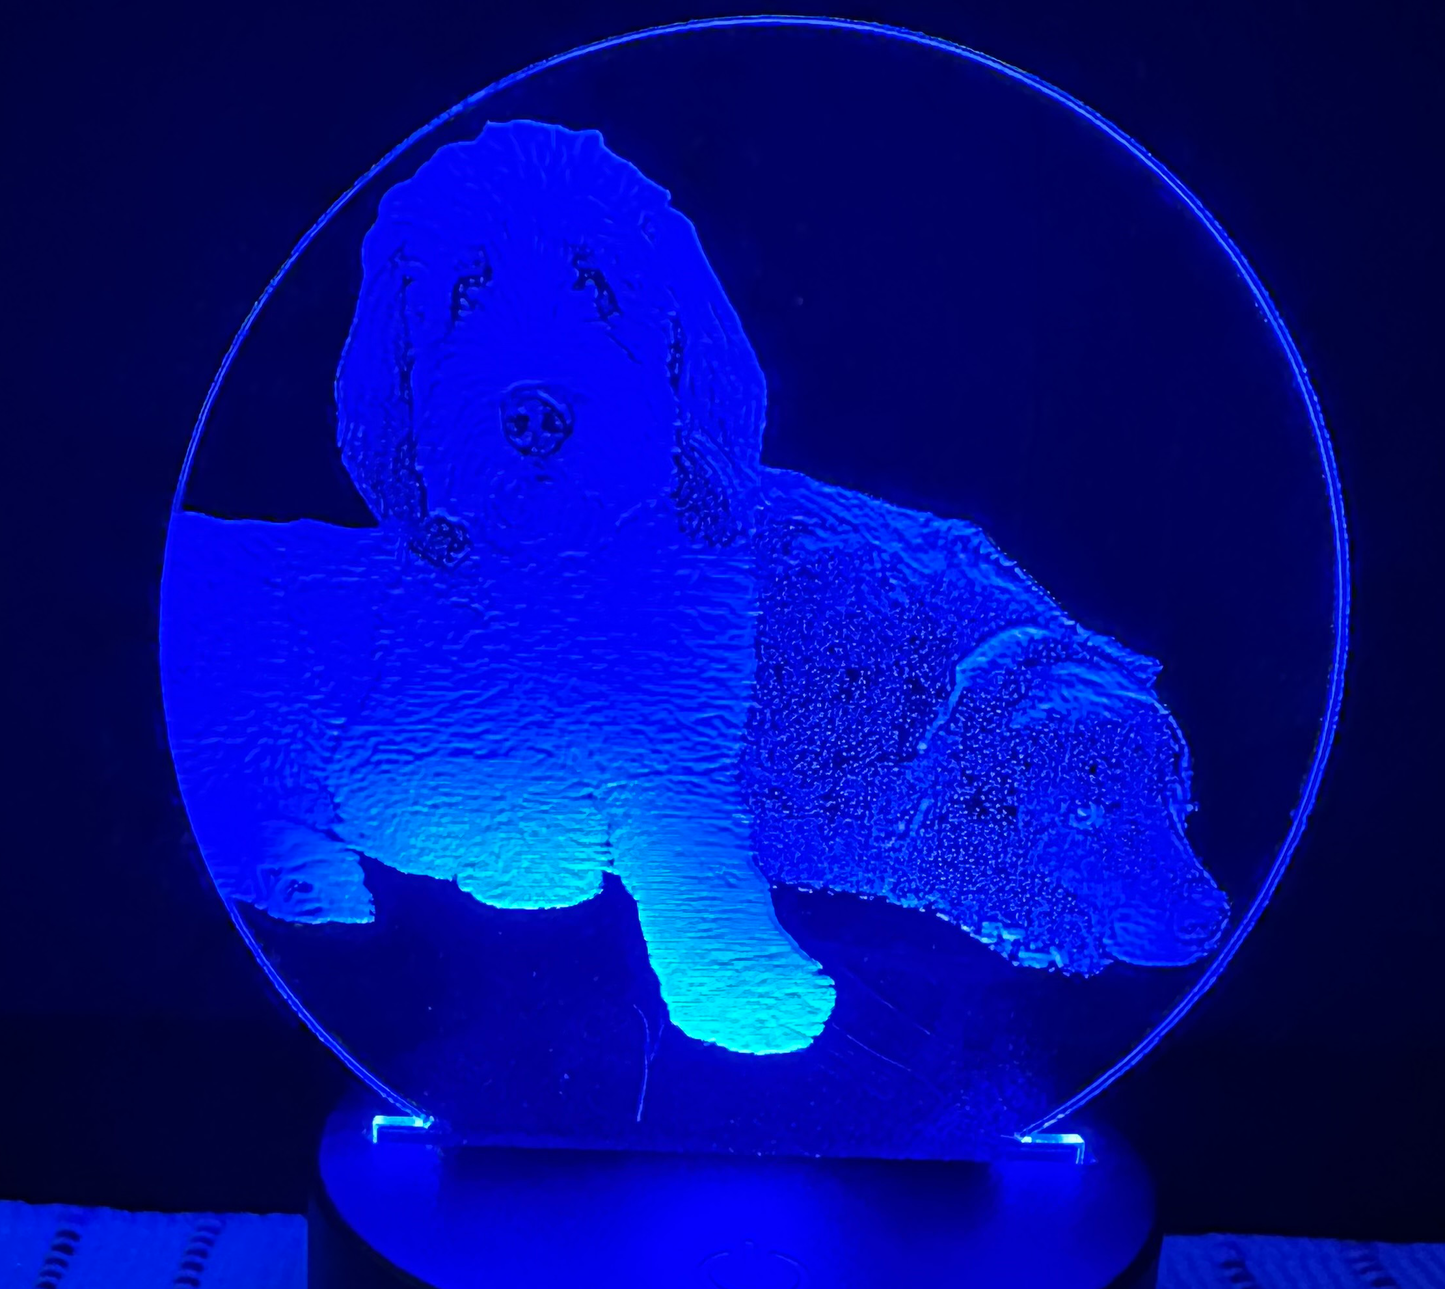 Custom Picture or Image Engraved in Acrylic with LED Light Base